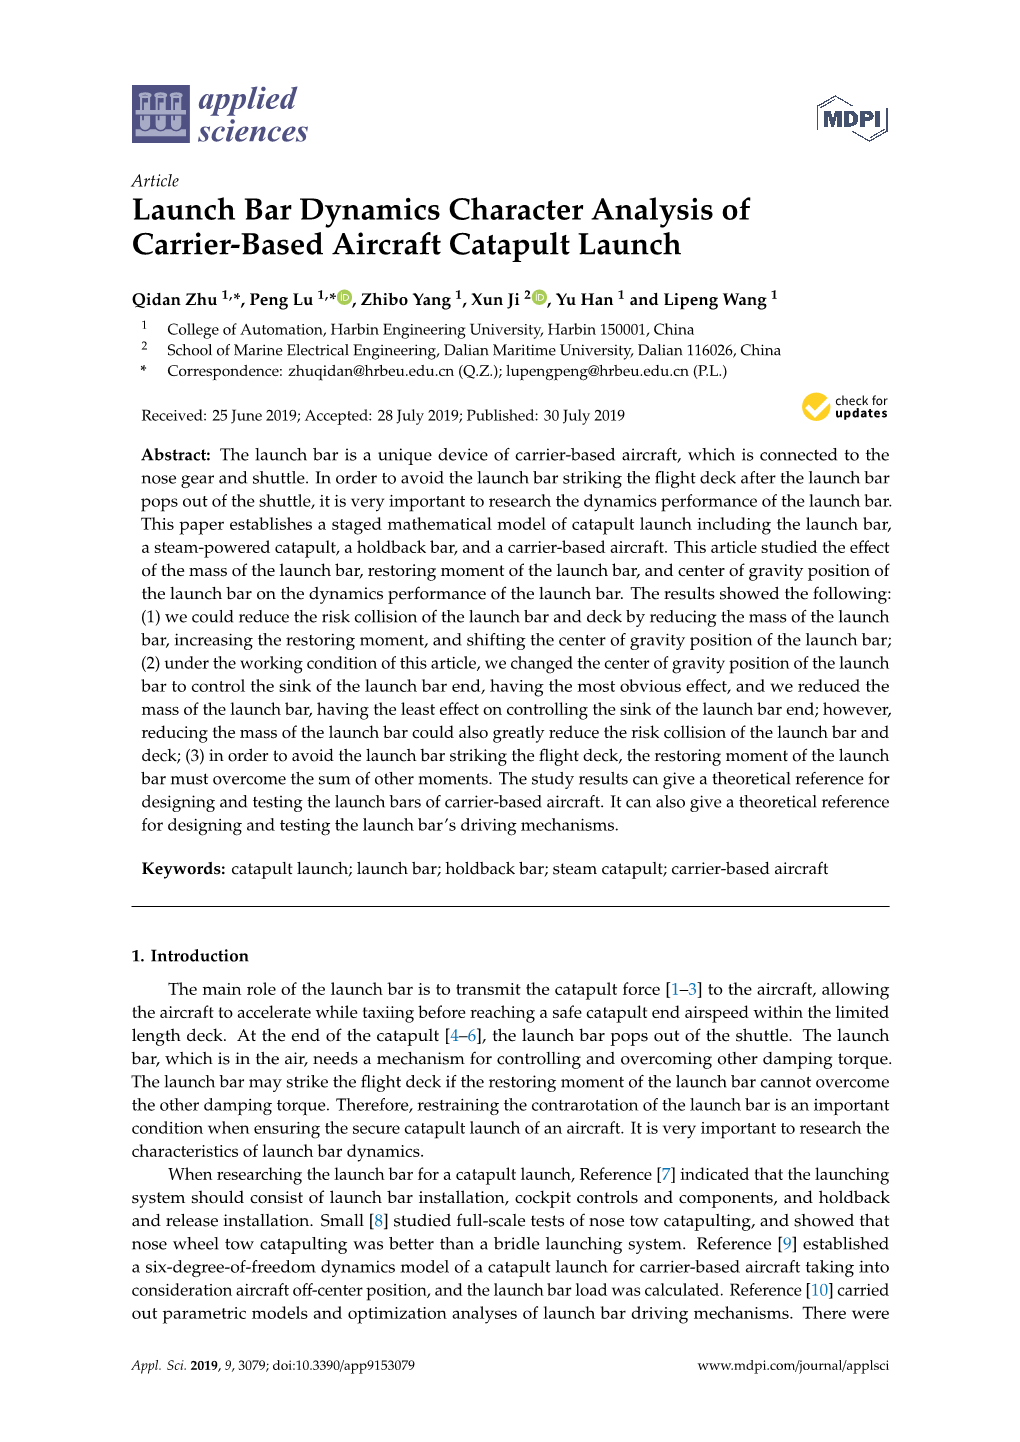 Launch Bar Dynamics Character Analysis of Carrier-Based Aircraft Catapult Launch